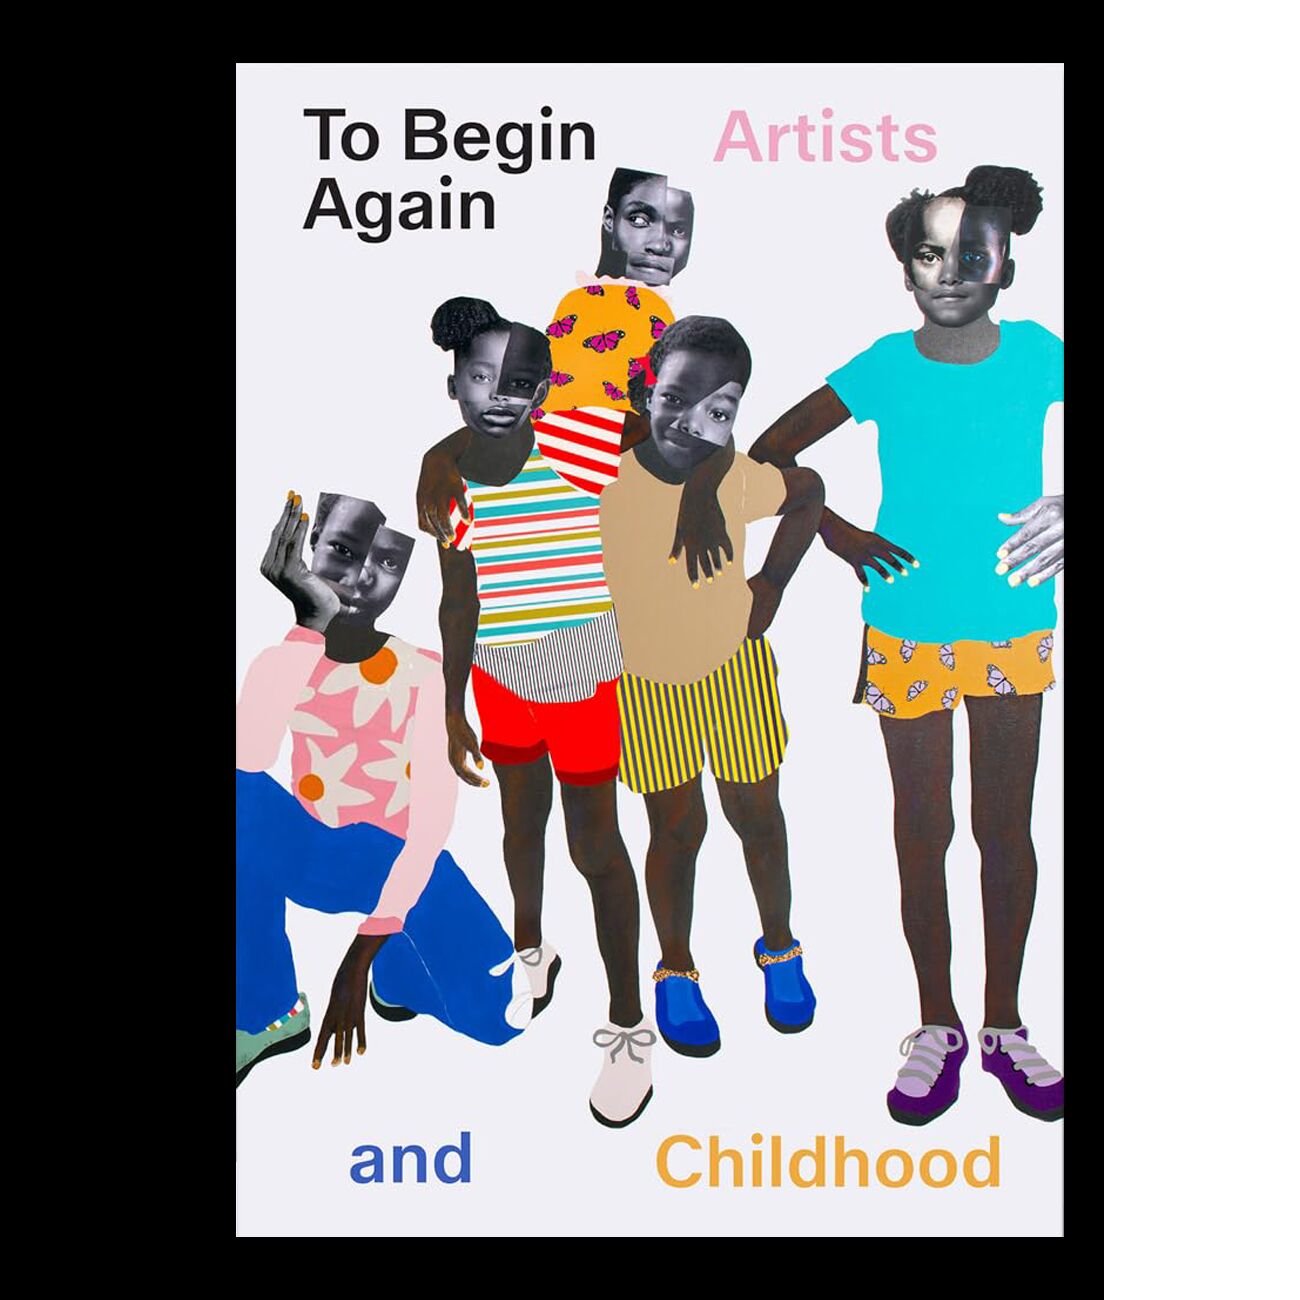 To Begin Again: Artists and Childhood